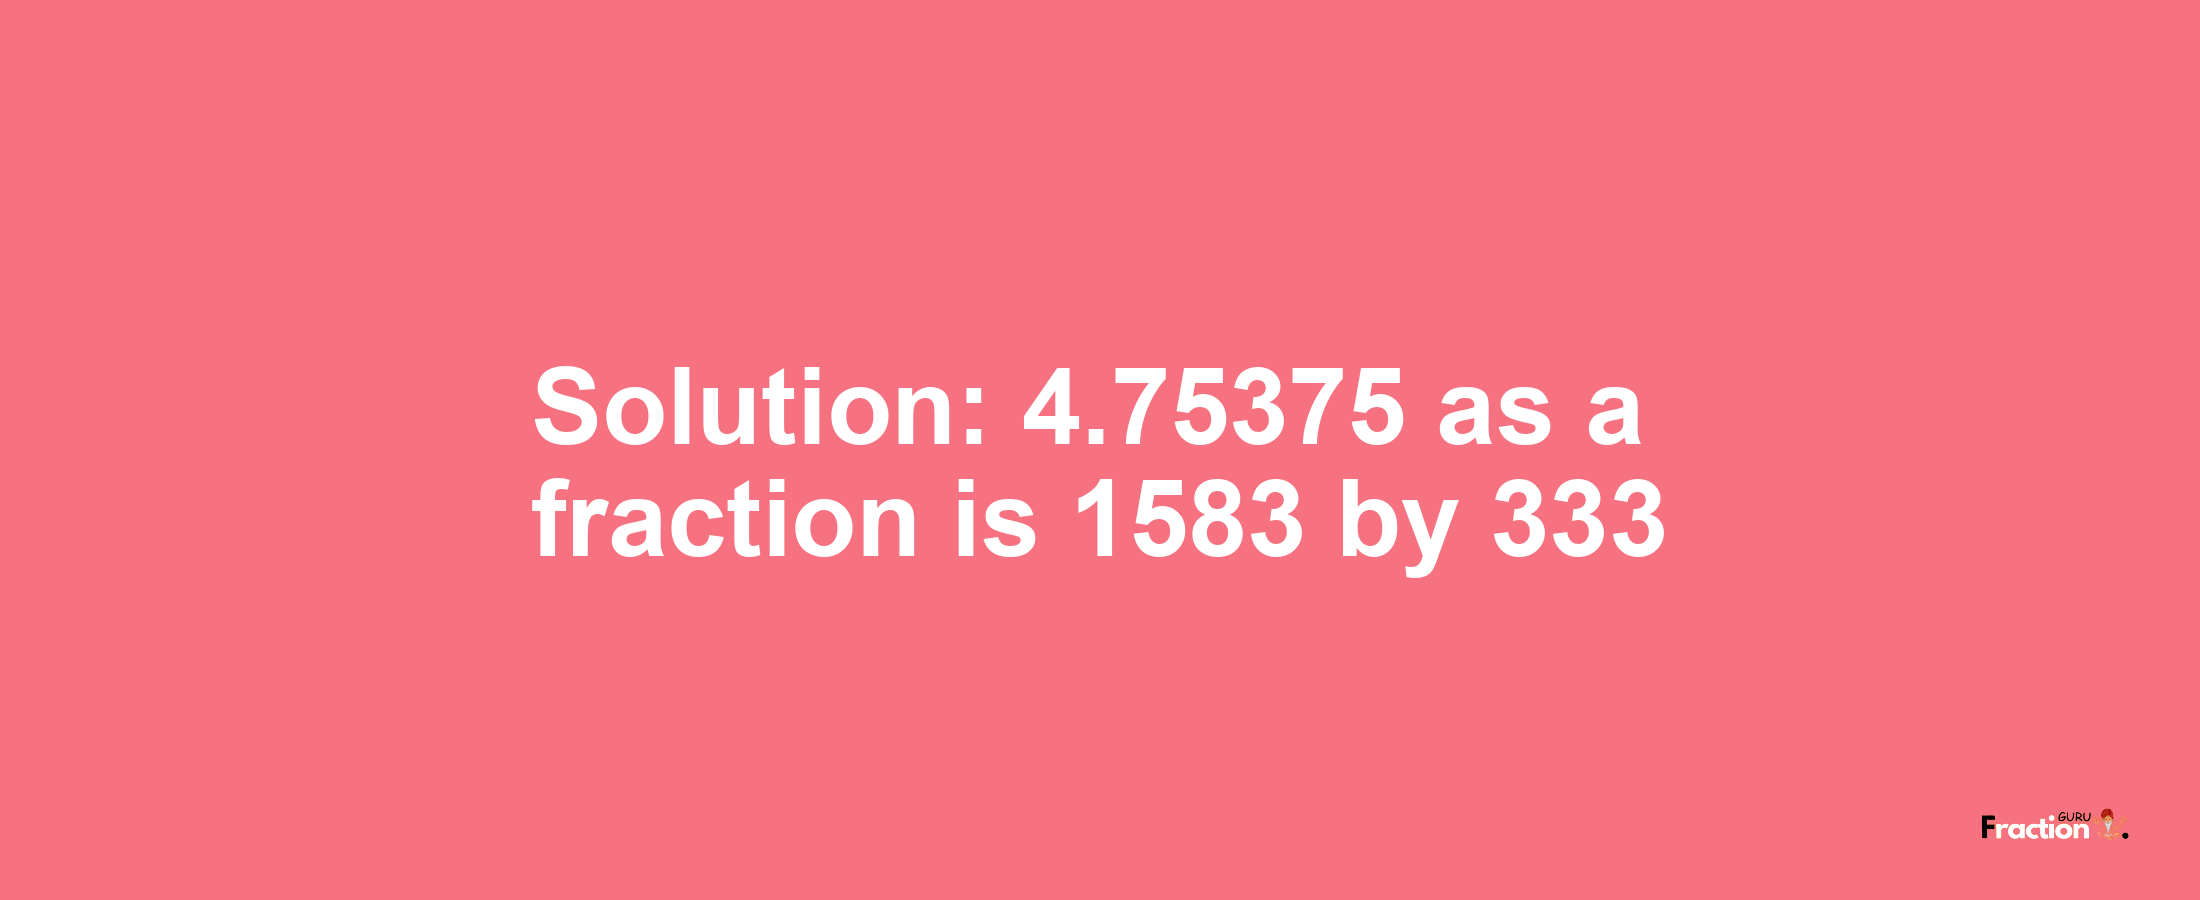 Solution:4.75375 as a fraction is 1583/333